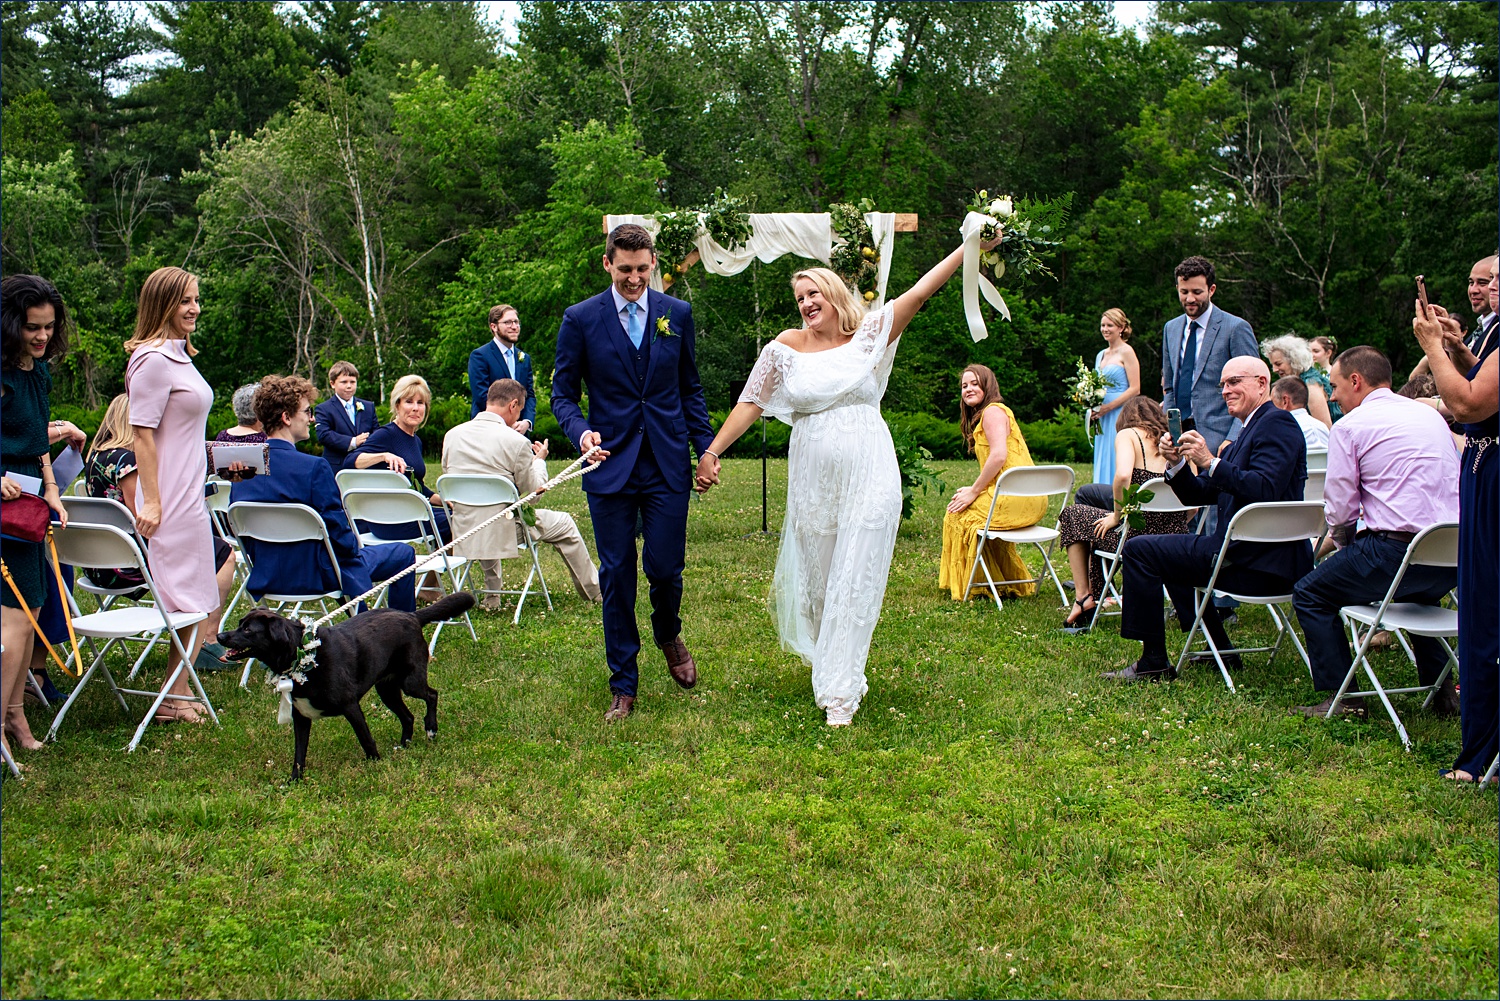 Walking back up the aisle with their dog in hand after marrying in New Hampshire